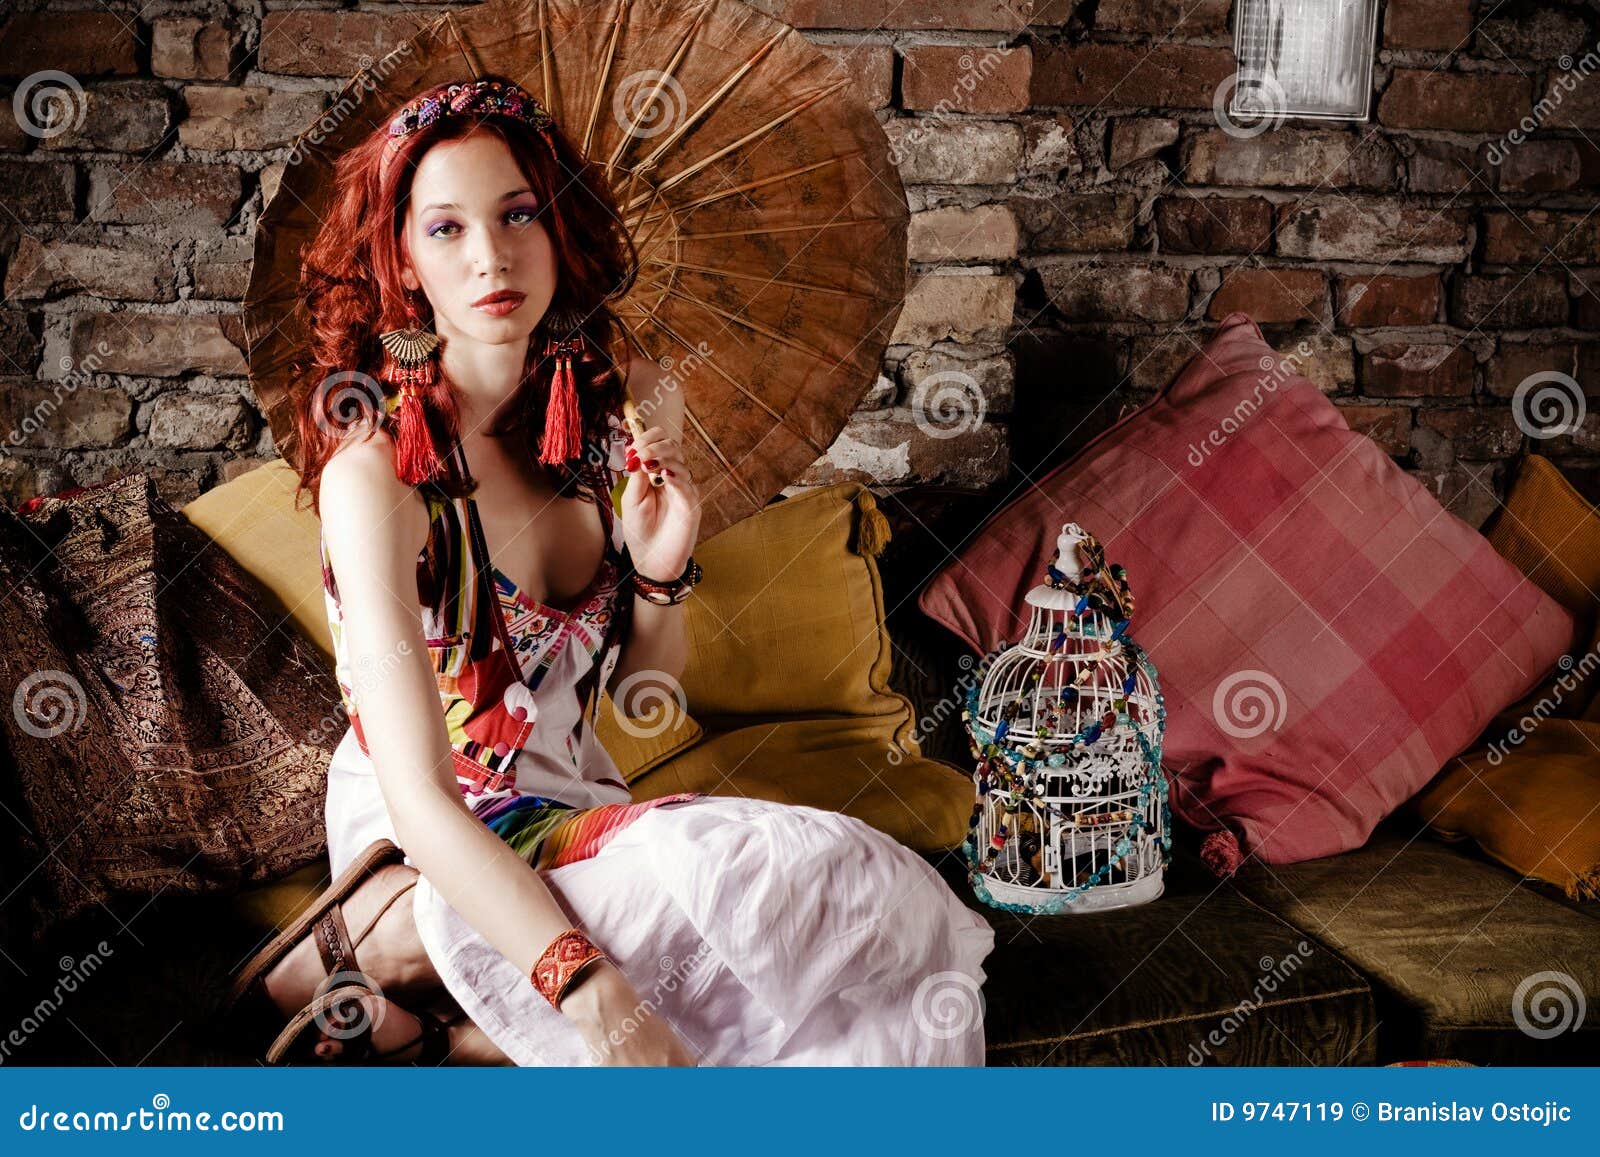 woman on sofa with parasol